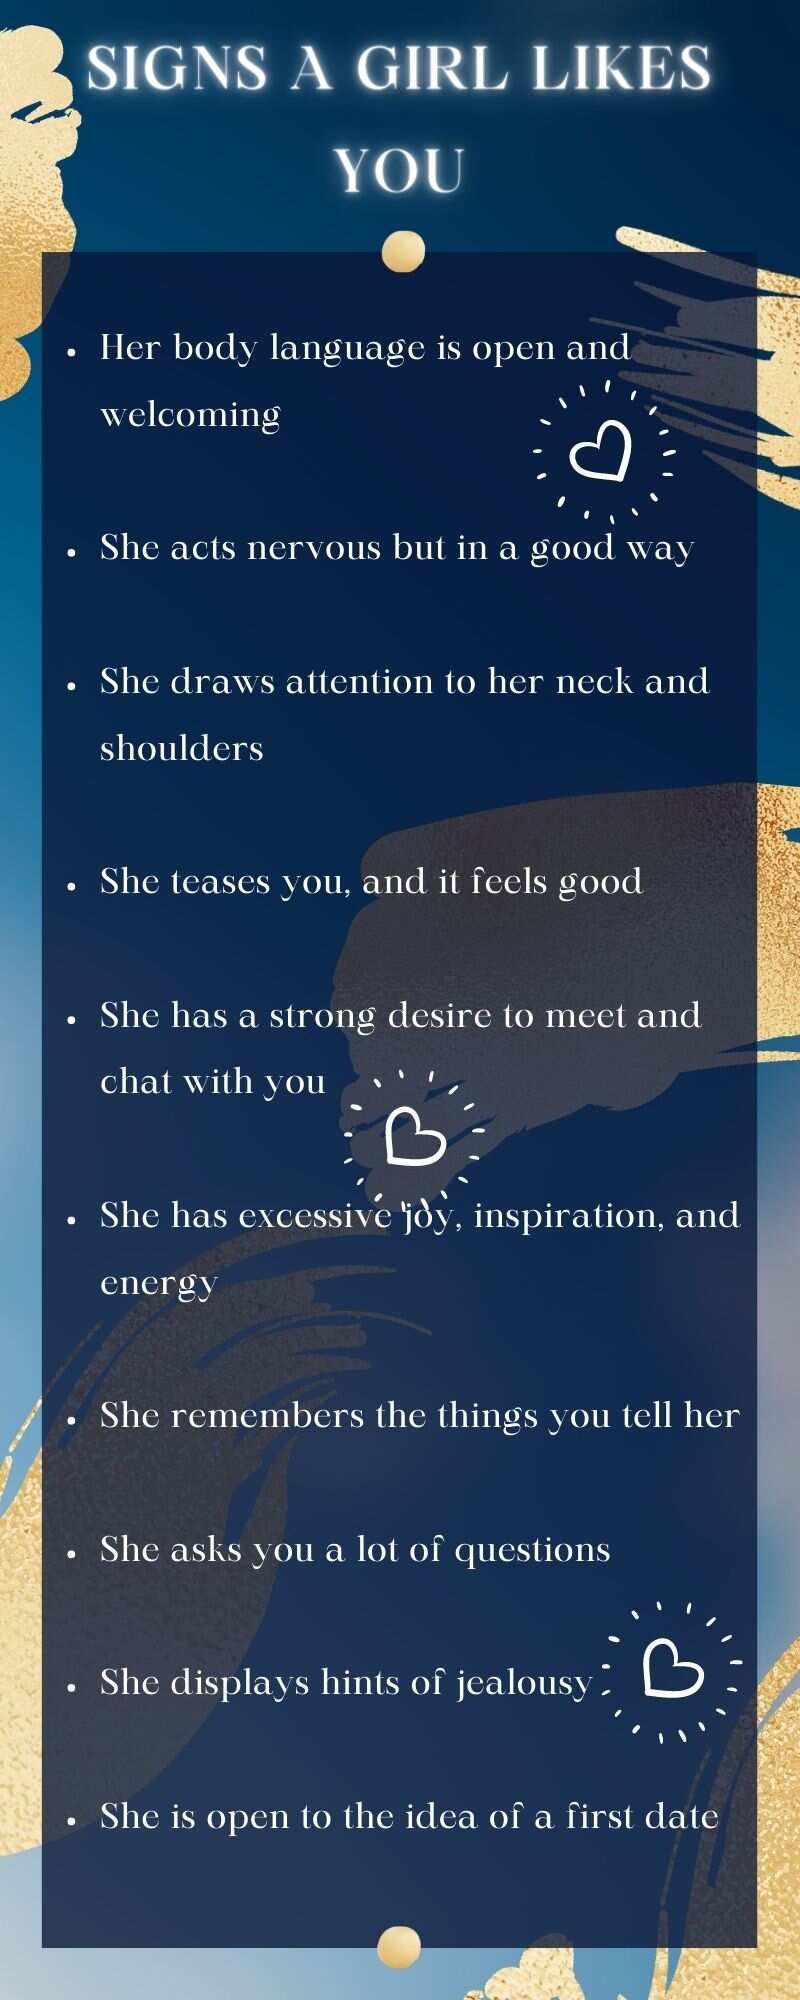 signs a girl likes you